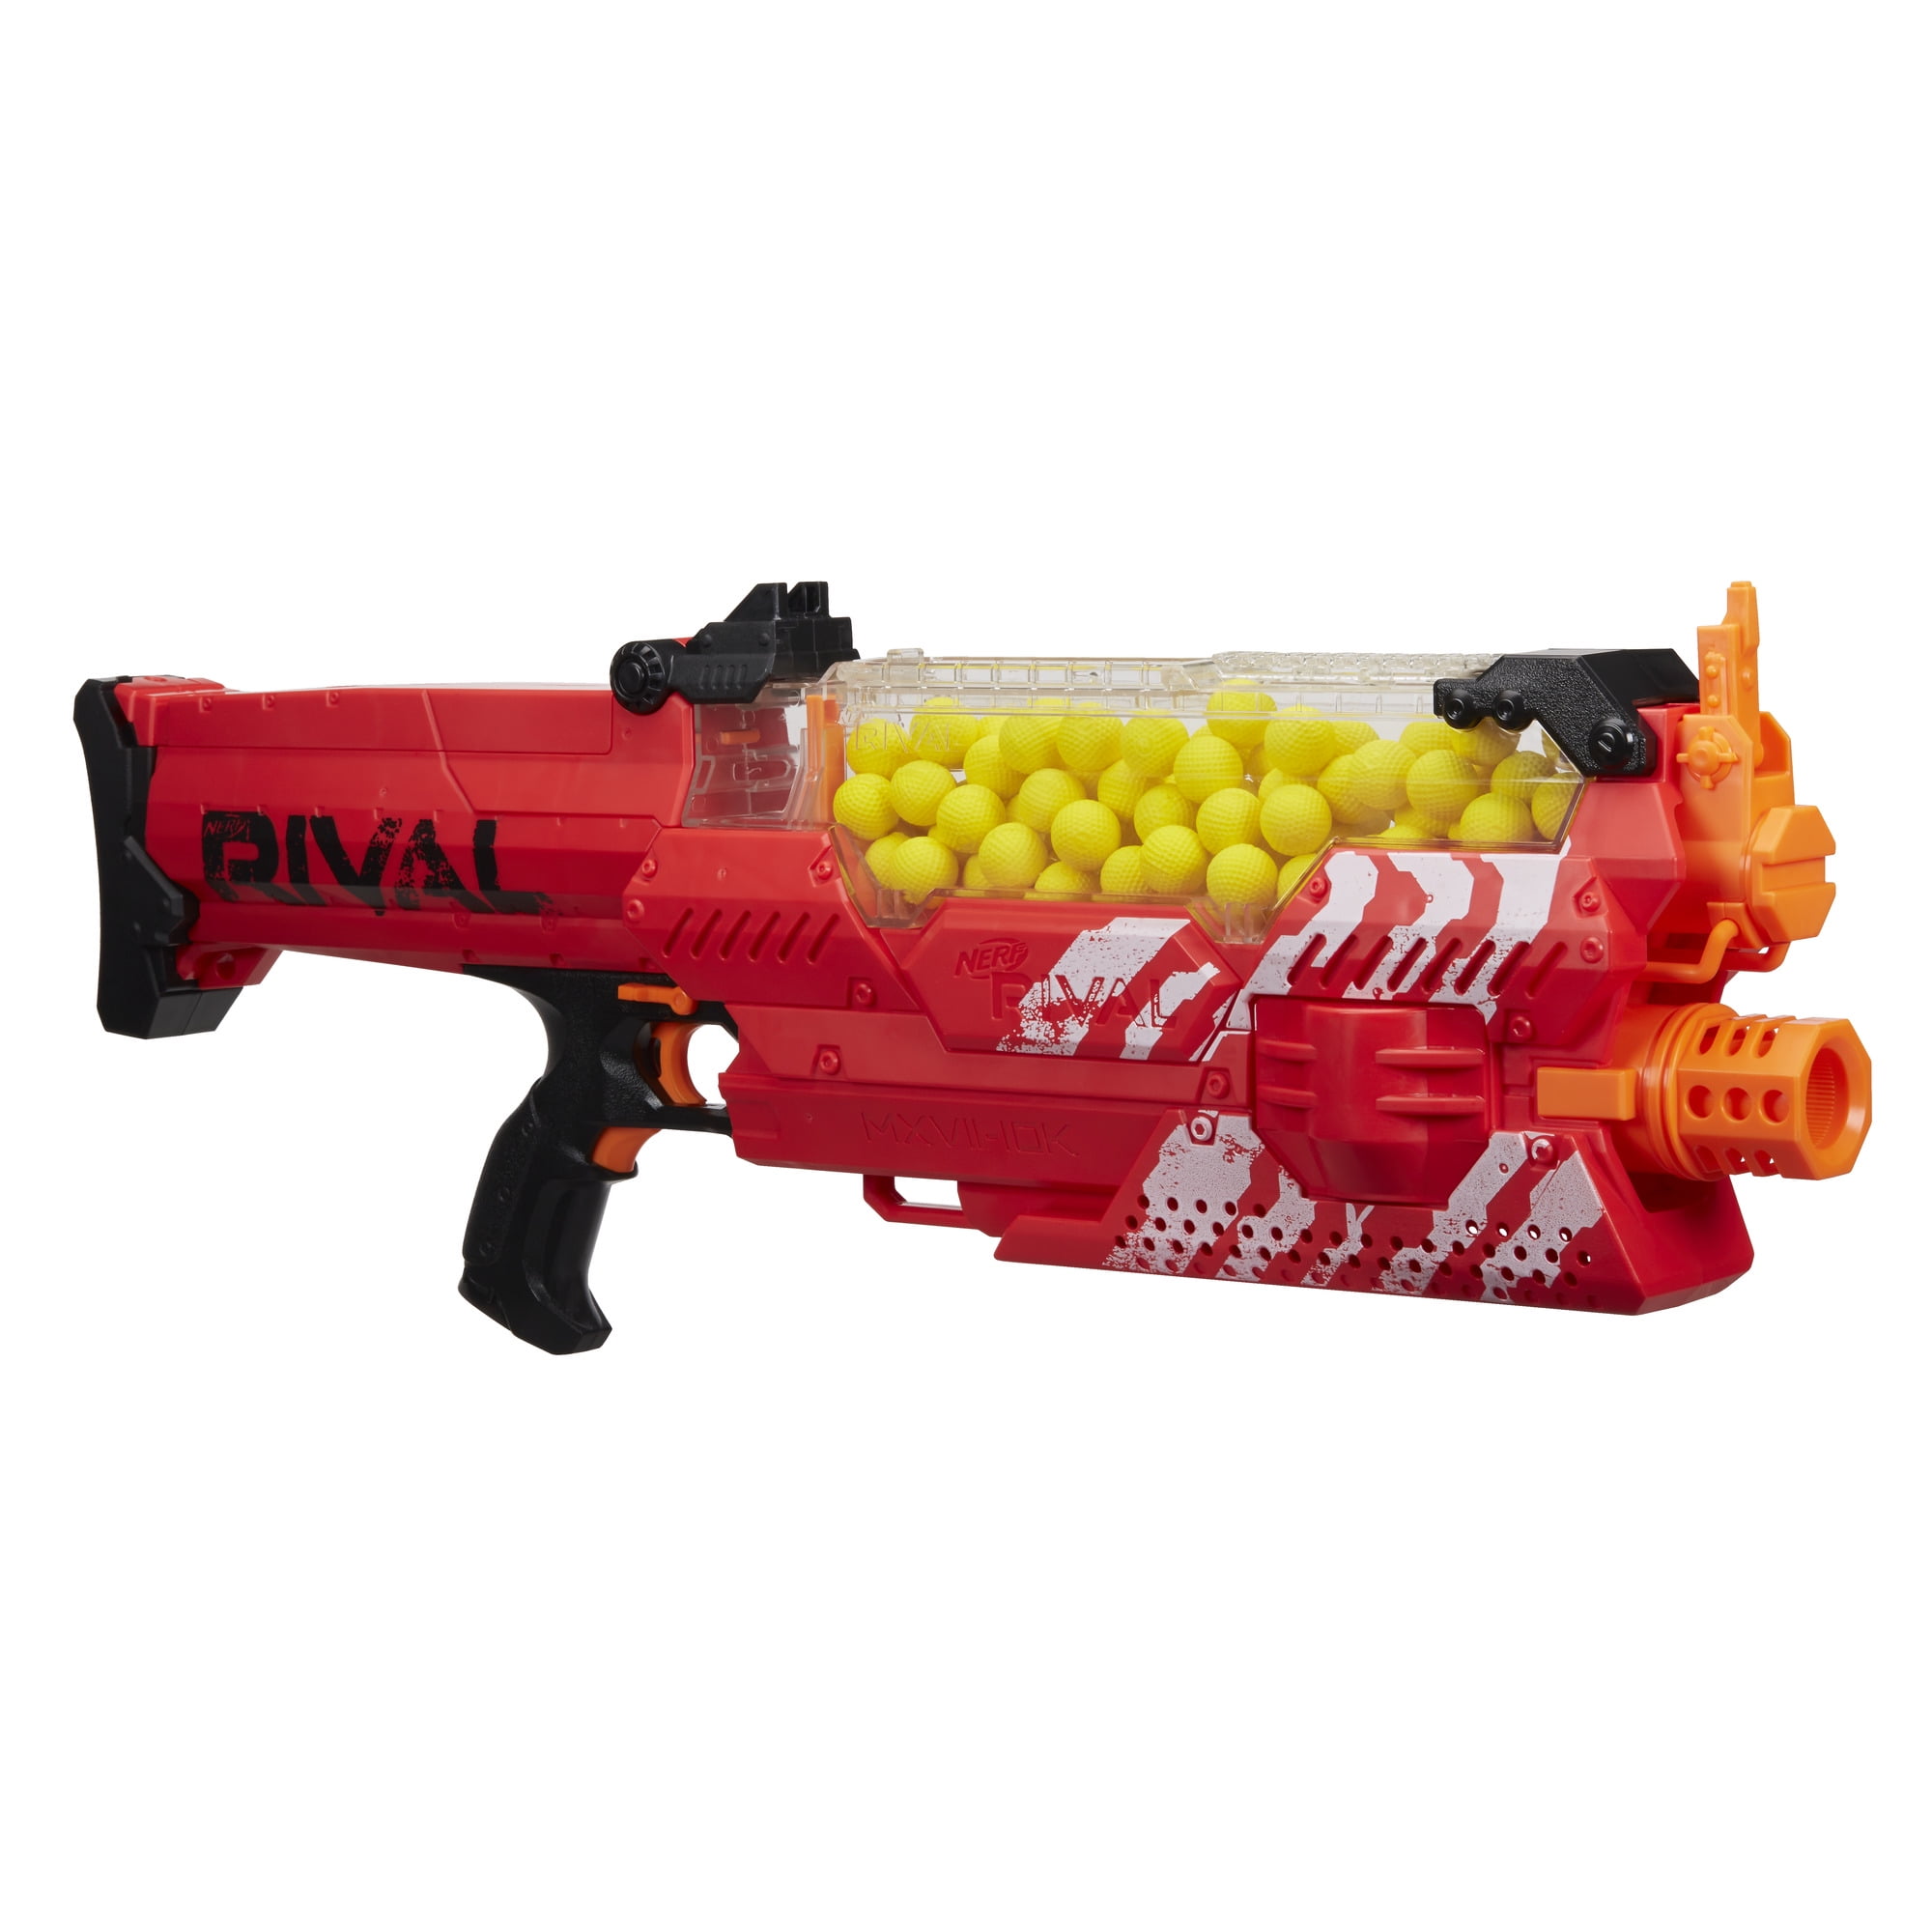 Tanhangguan 50/100pcs Nerf Rival Compatible Ammo by HeadShot Ammo 5 Colors Foam Bullet Ball Replacement Refill Pack for Apollo Zeus Khaos Atlas Artemis Blasters Kids Child Christmas Toys Gifts